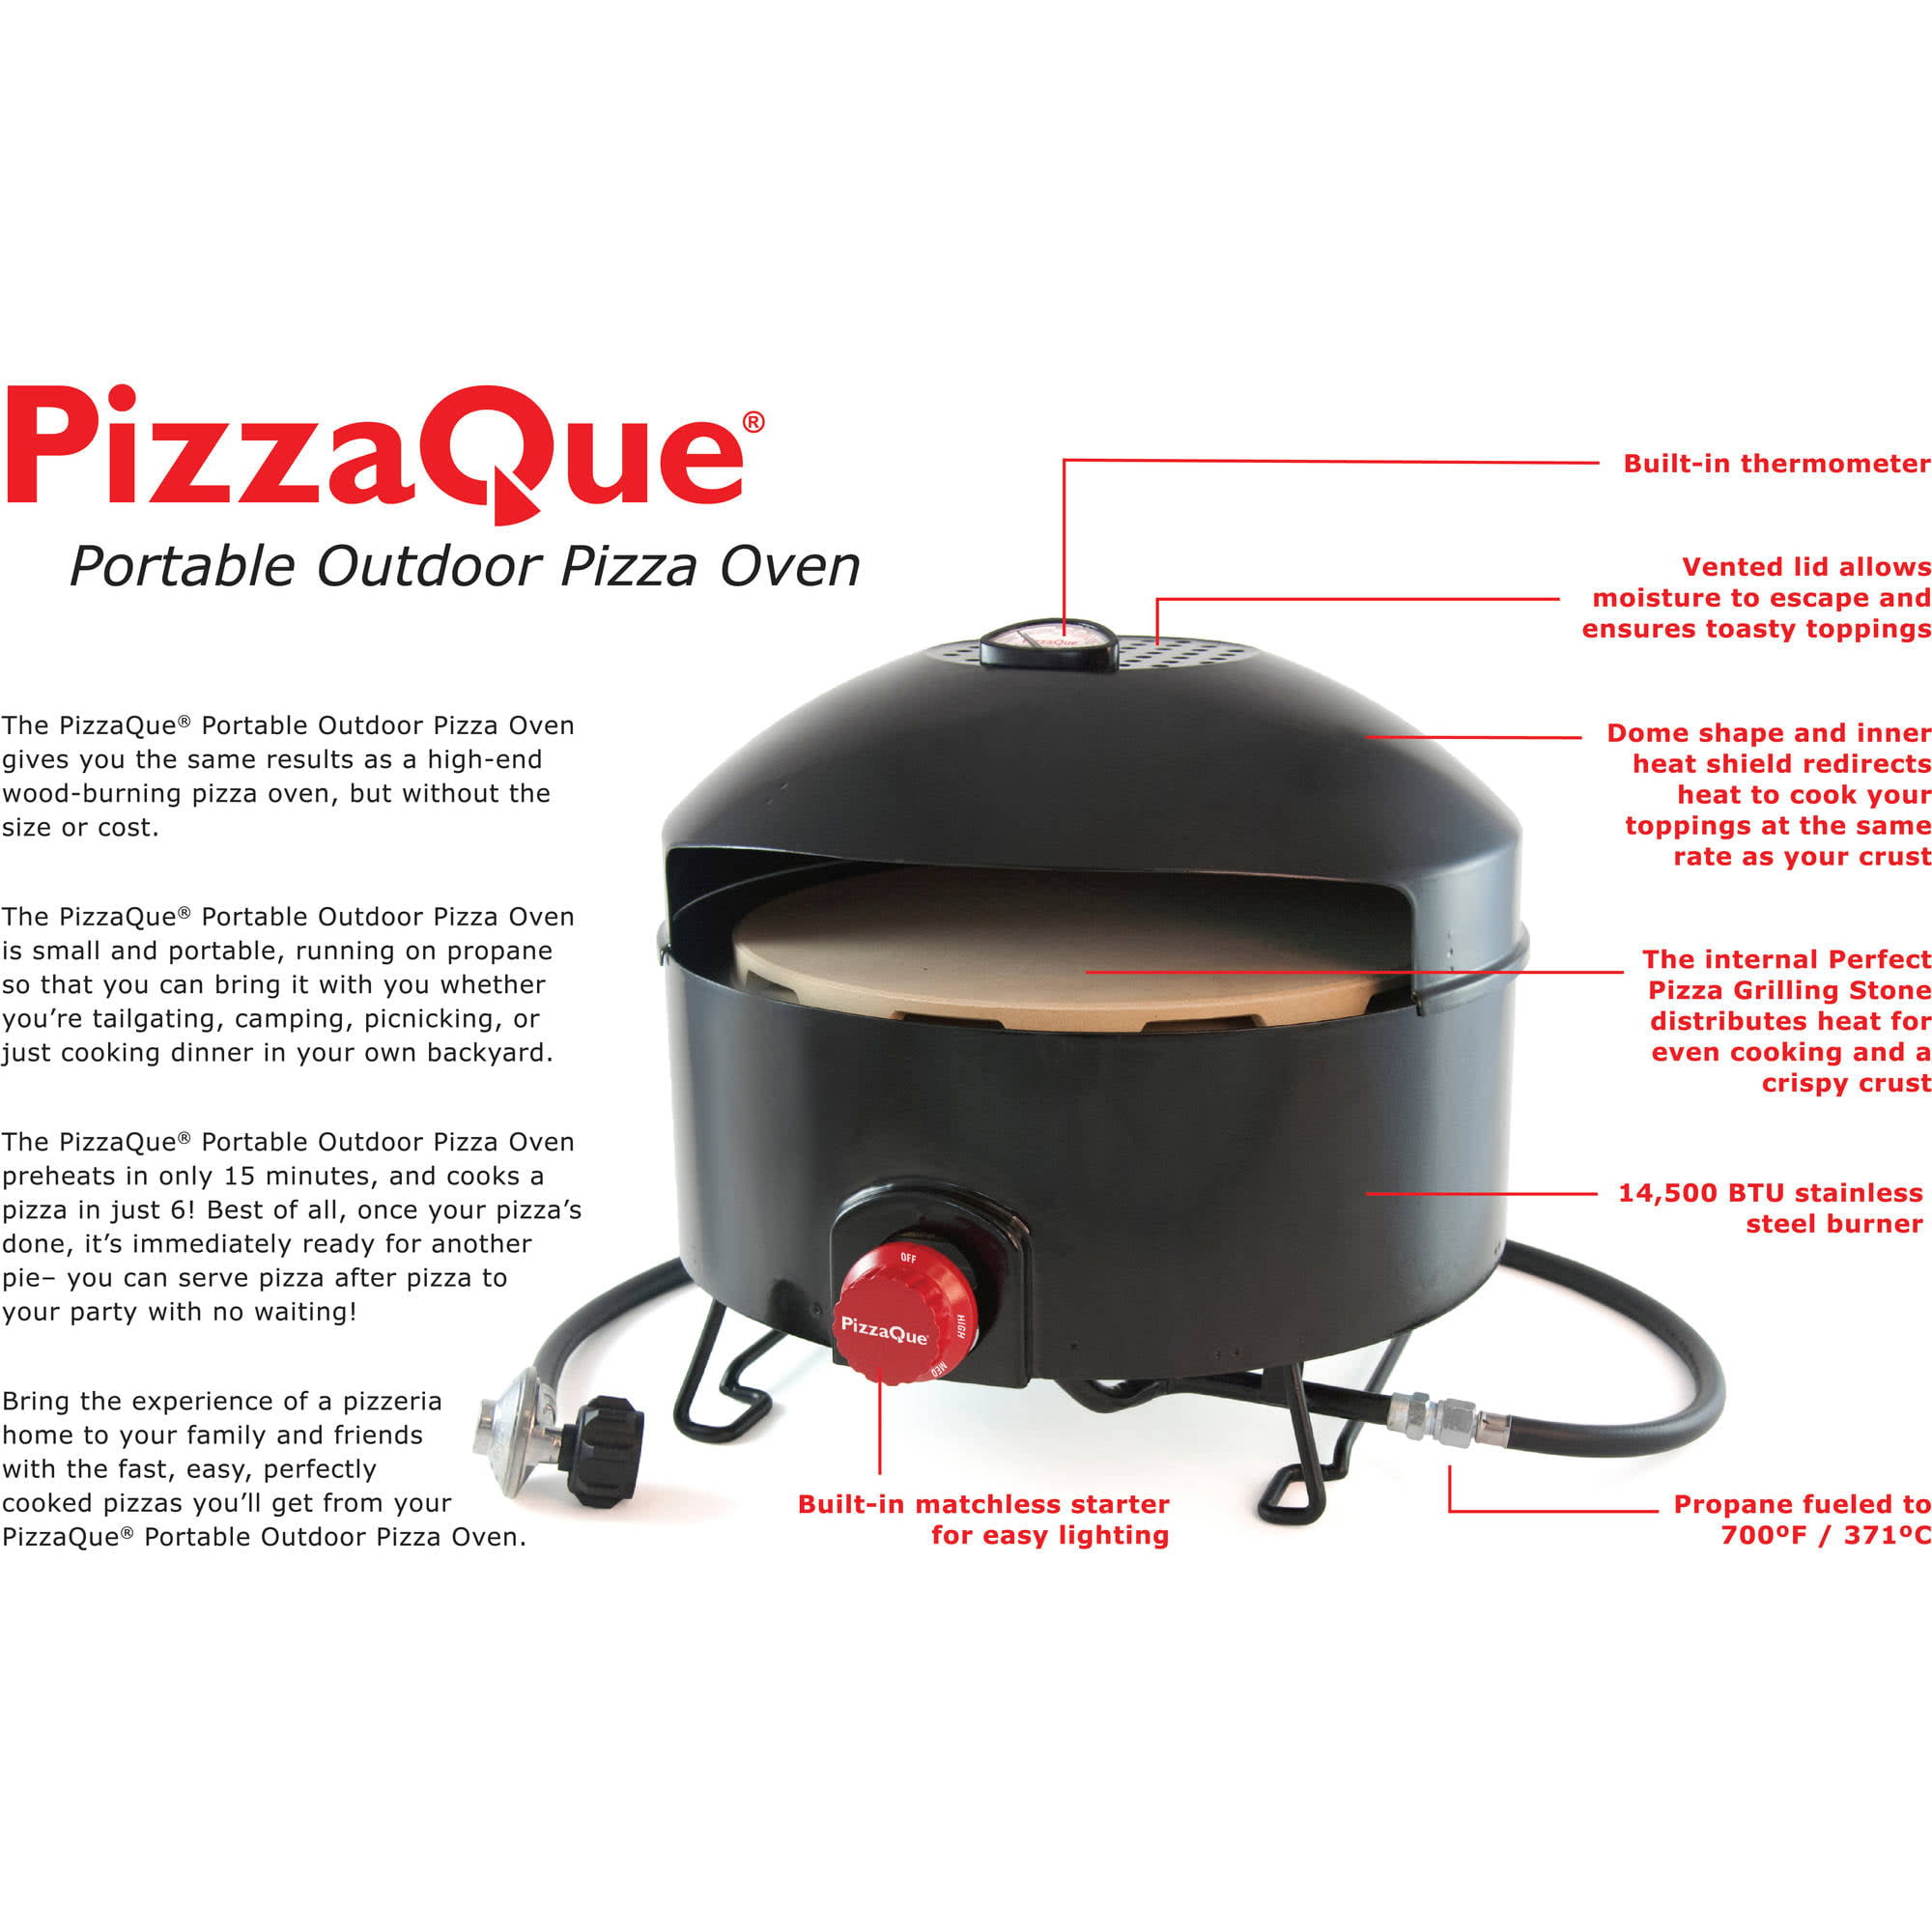 Pizzacraft PC6500 PizzaQue Portable Outdoor Pizza Oven - image 5 of 9